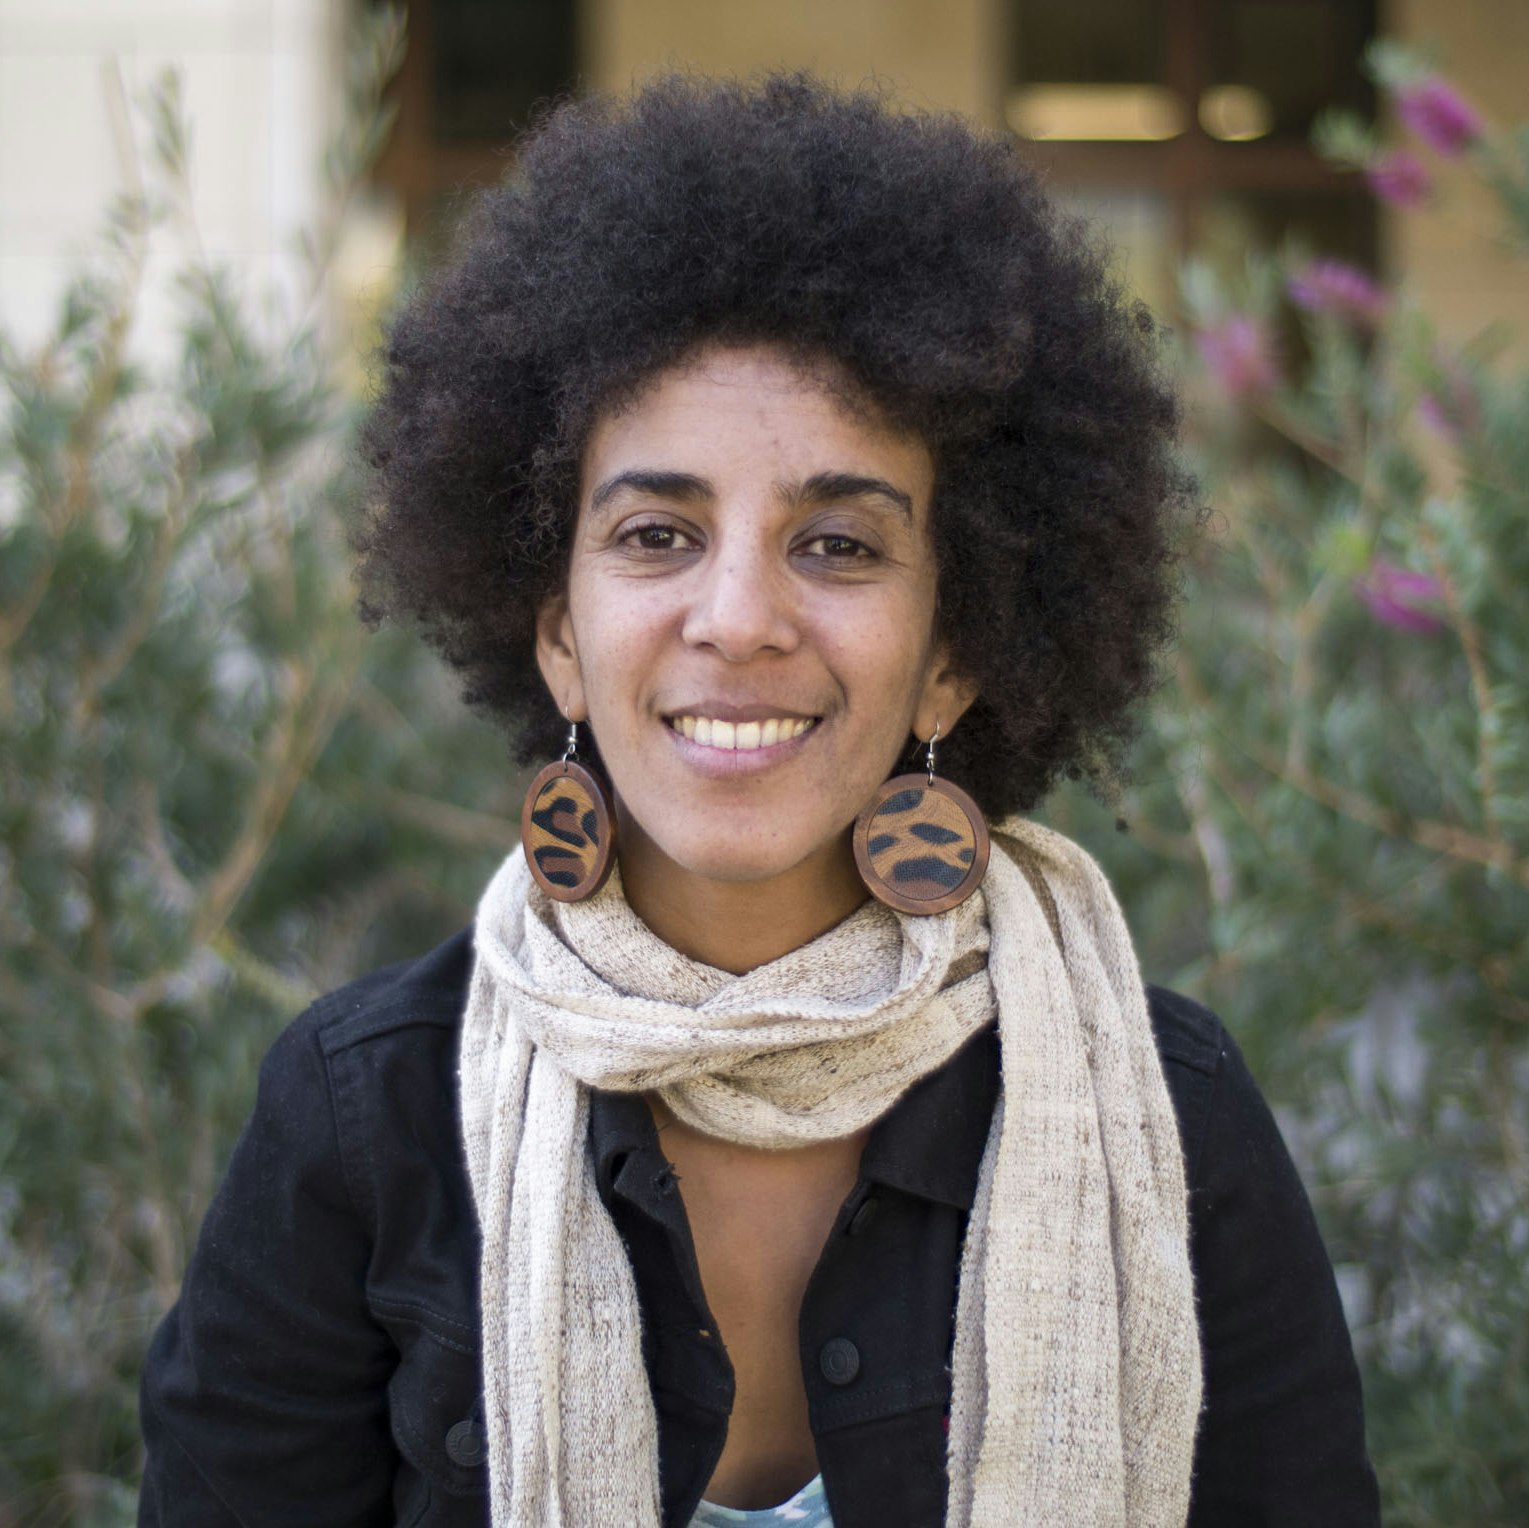 The Quest for Ethical Artificial Intelligence: A Conversation with Timnit Gebru